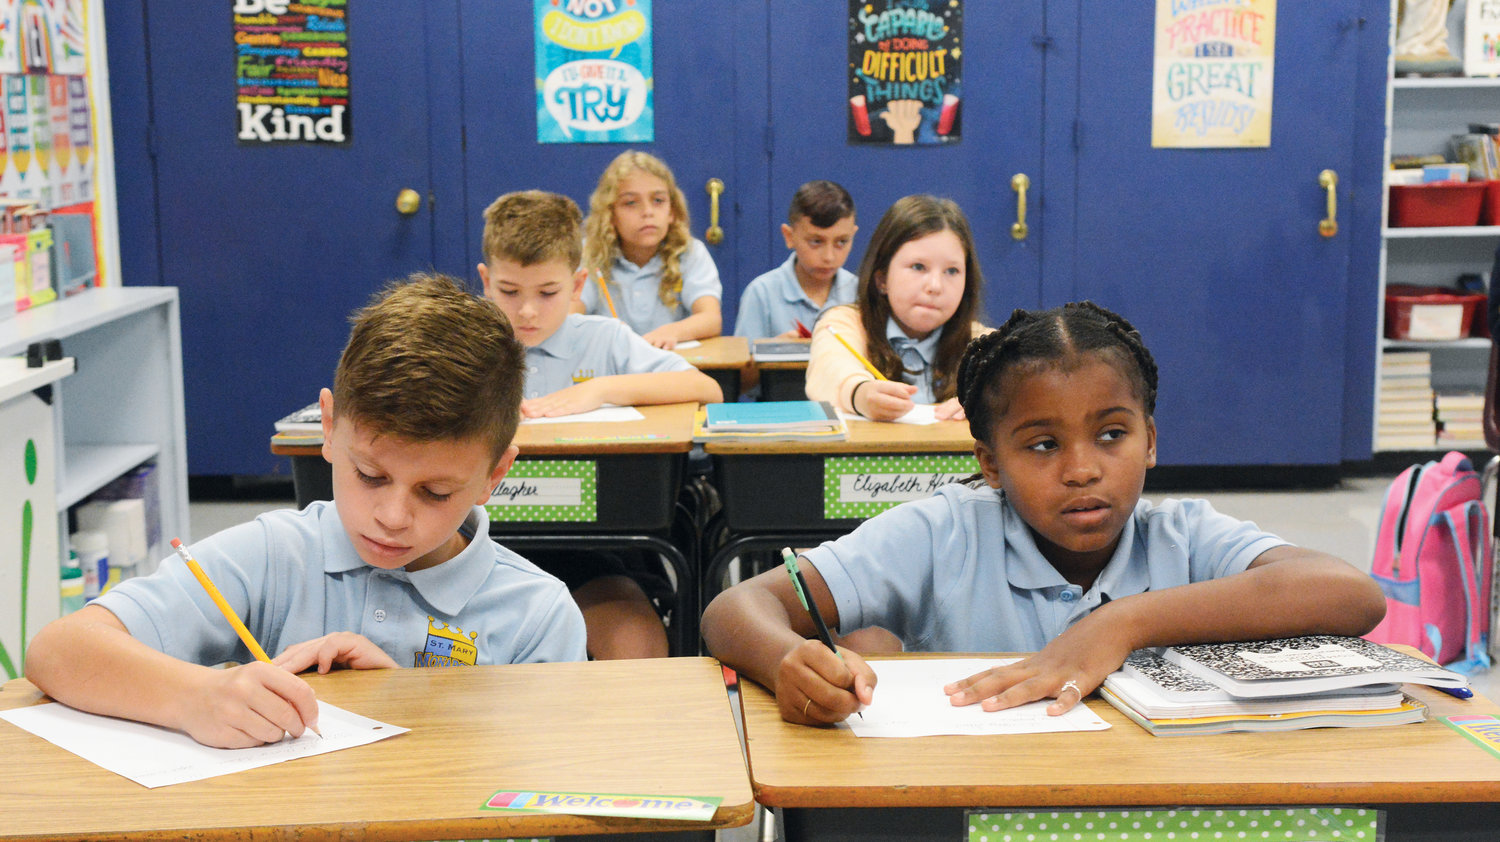 CLASSROOM STUDIES—Students got right back to learning Sept. 6, the first day of classes at St. Mary’s School in Fishkill. Fourth-graders quickly put their pencils to paper.